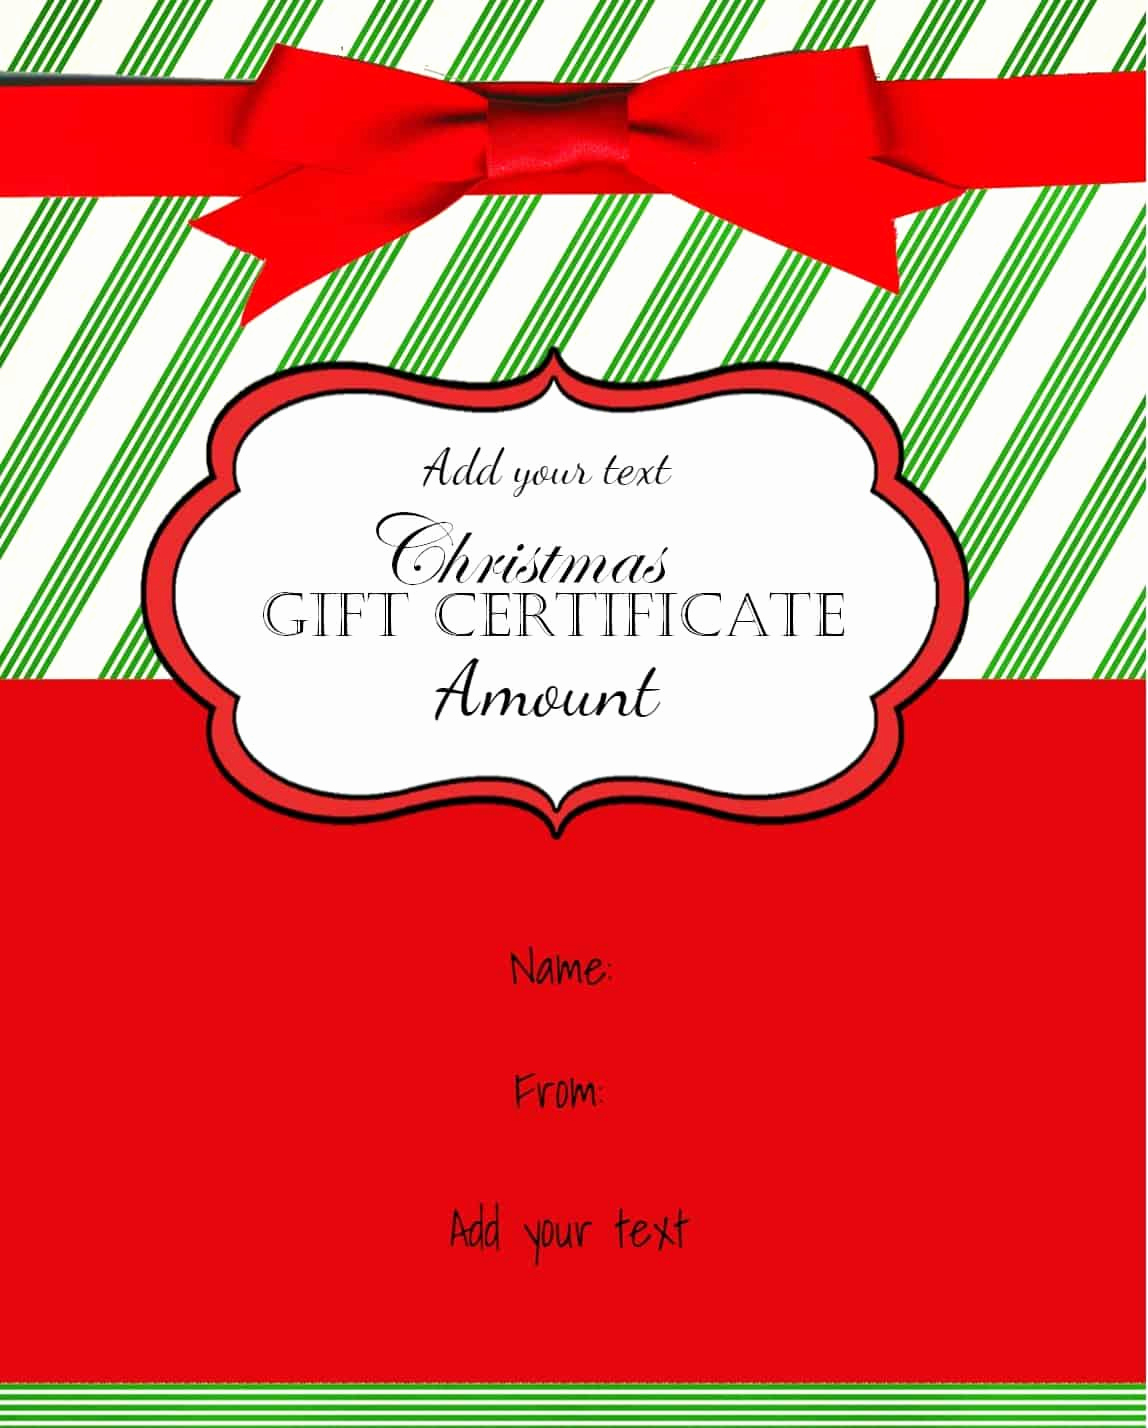 Free Gift Certificate Templates Best Of Free Christmas Gift Certificate Template